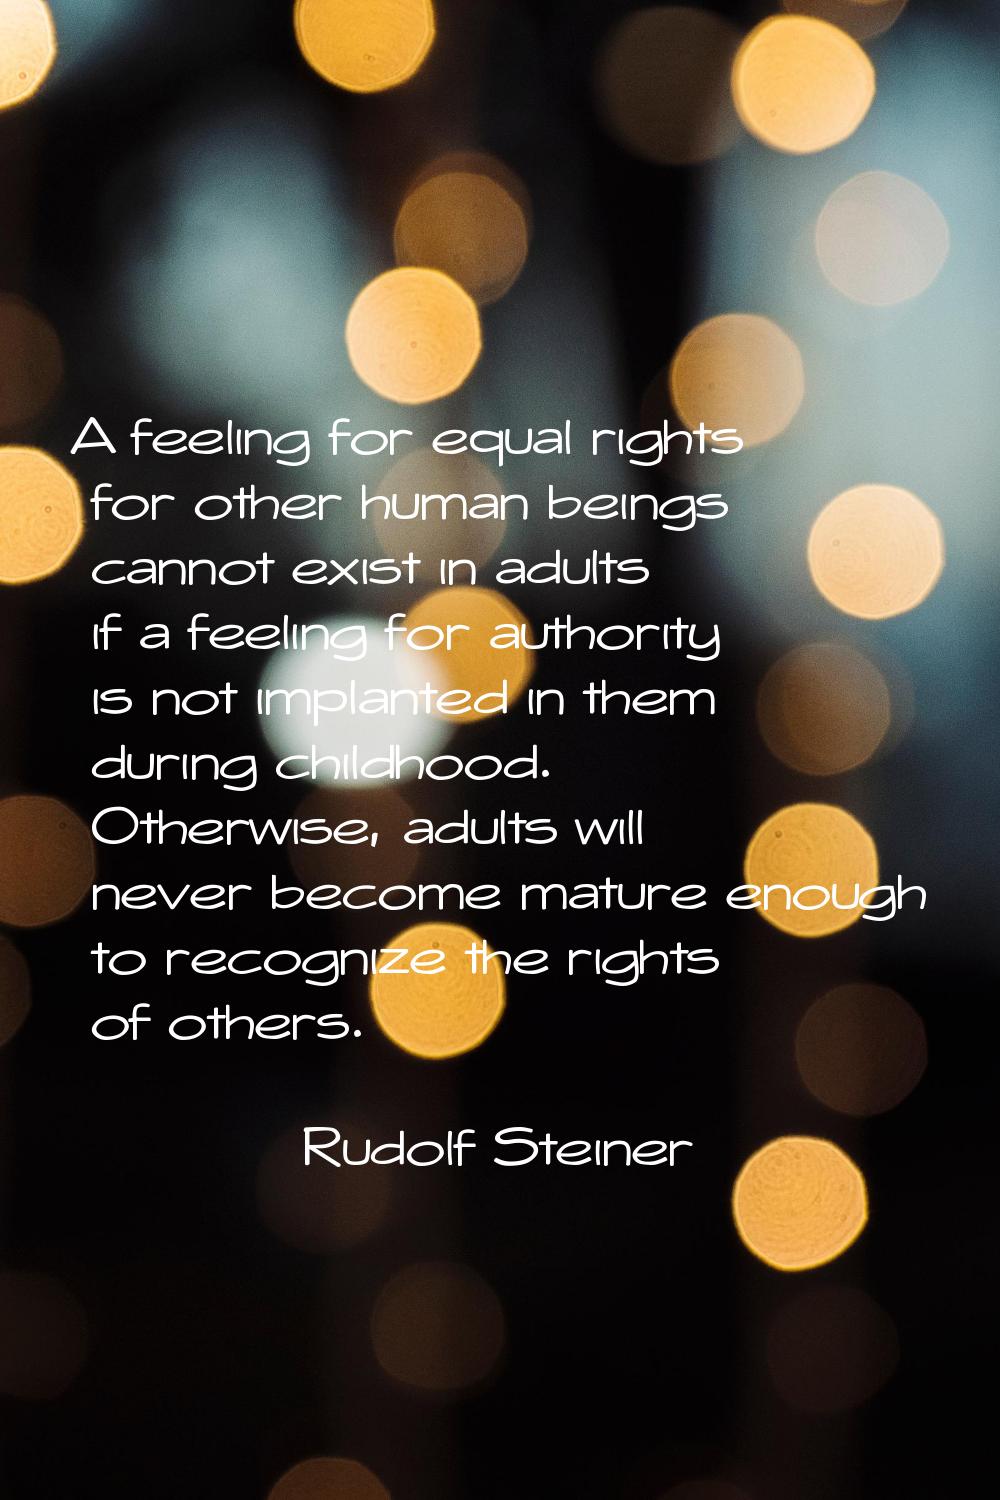 A feeling for equal rights for other human beings cannot exist in adults if a feeling for authority